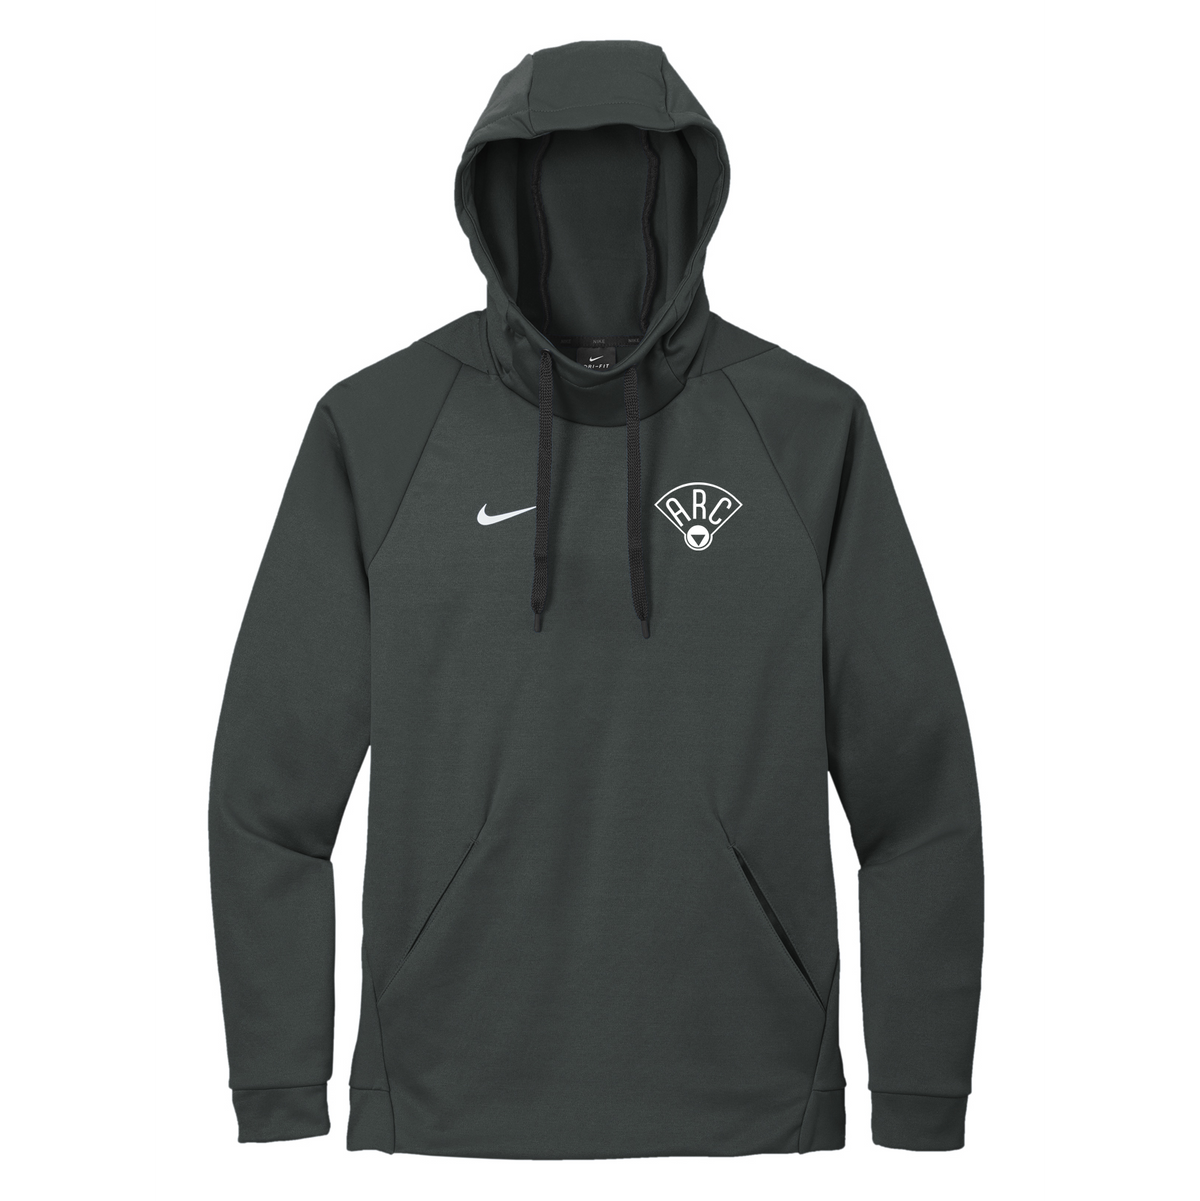 Arc Lacrosse Club Nike Therma-FIT Hoodie - EMBROIDERED